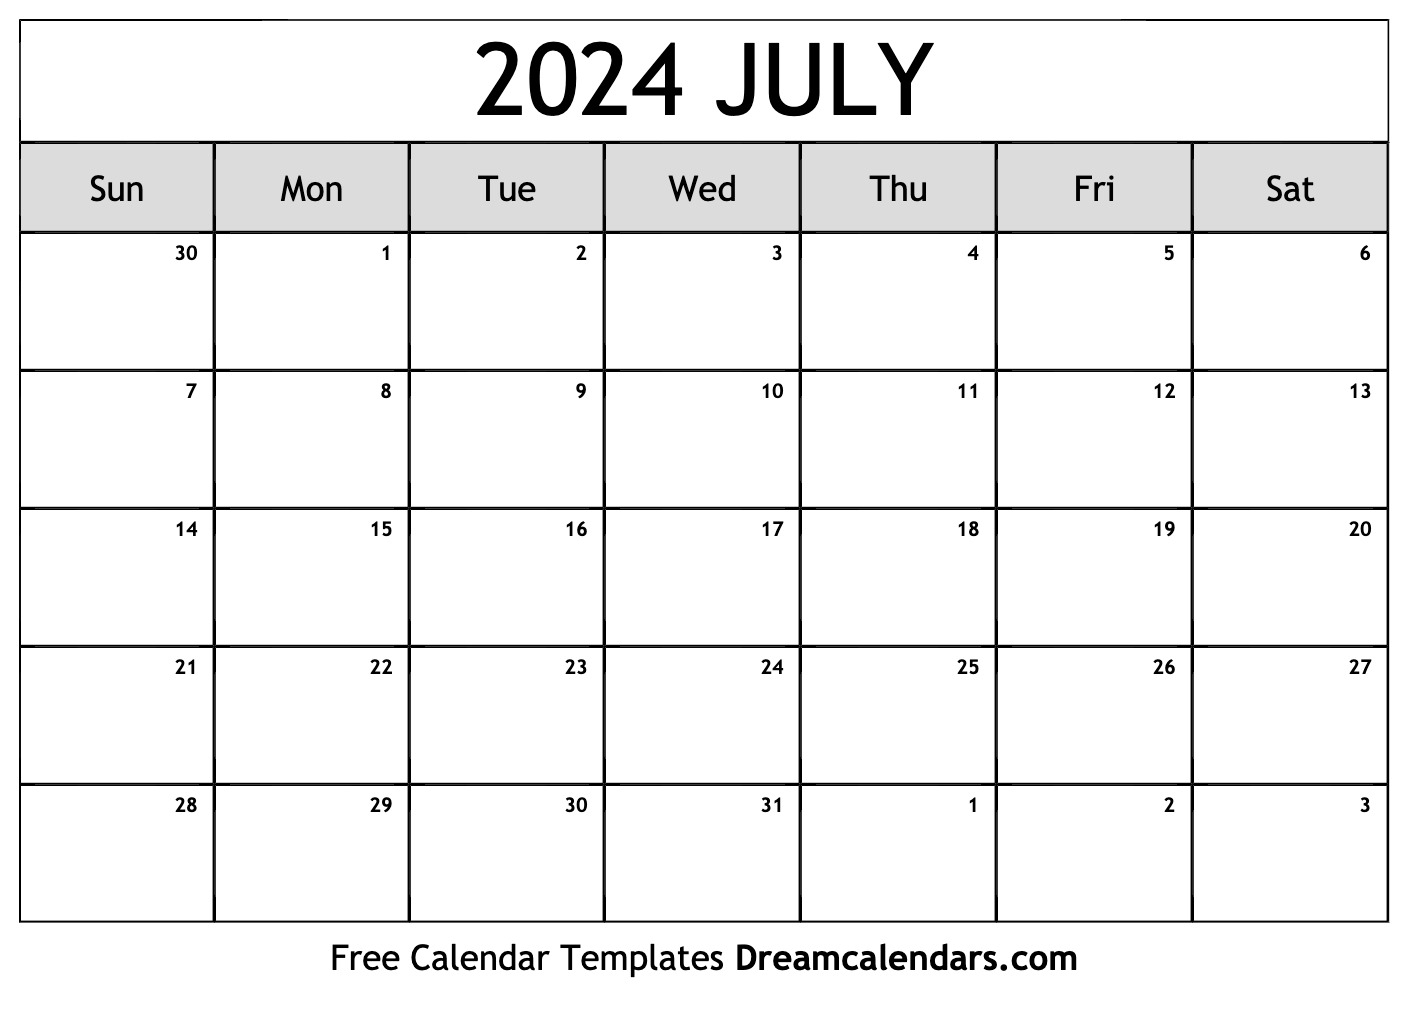 July 2024 Calendar | Free Blank Printable With Holidays for Printable July Calendar 2024